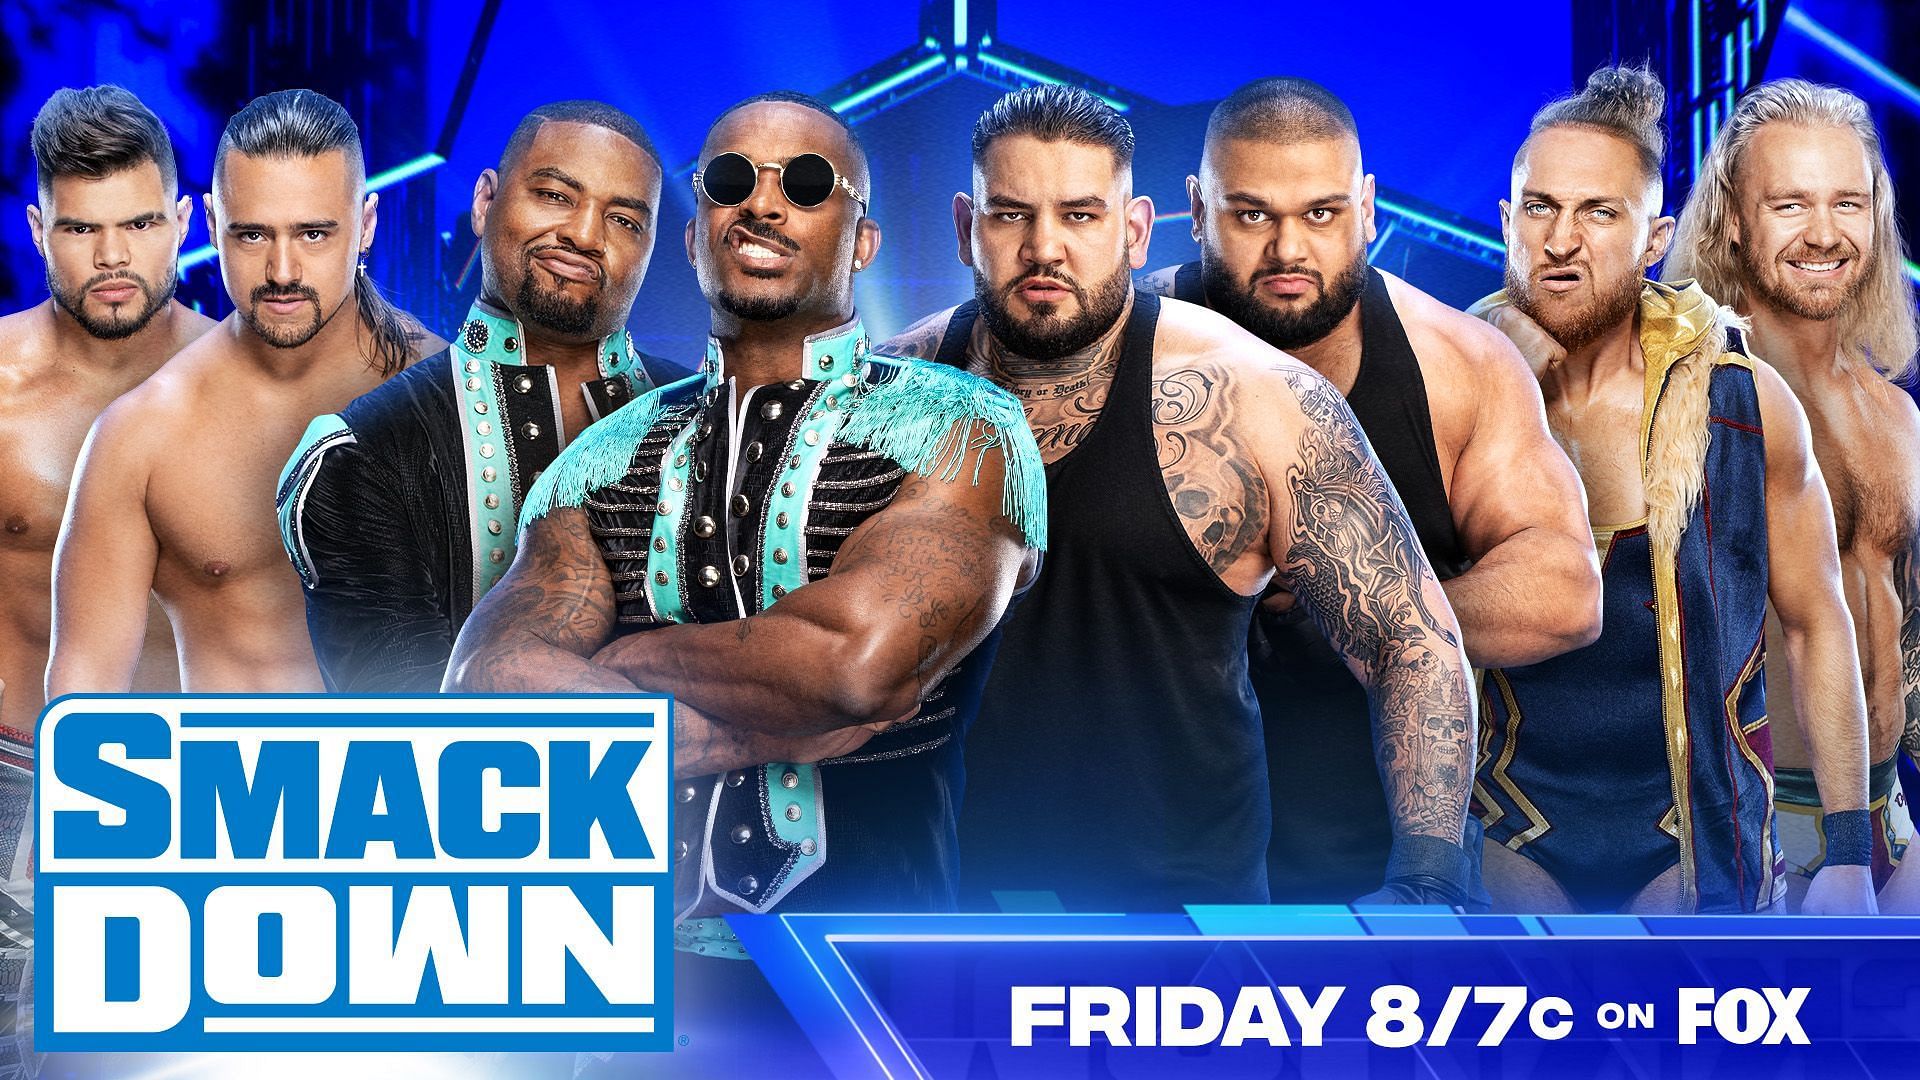 A massive number one contenders match will take place on WWE SmackDown